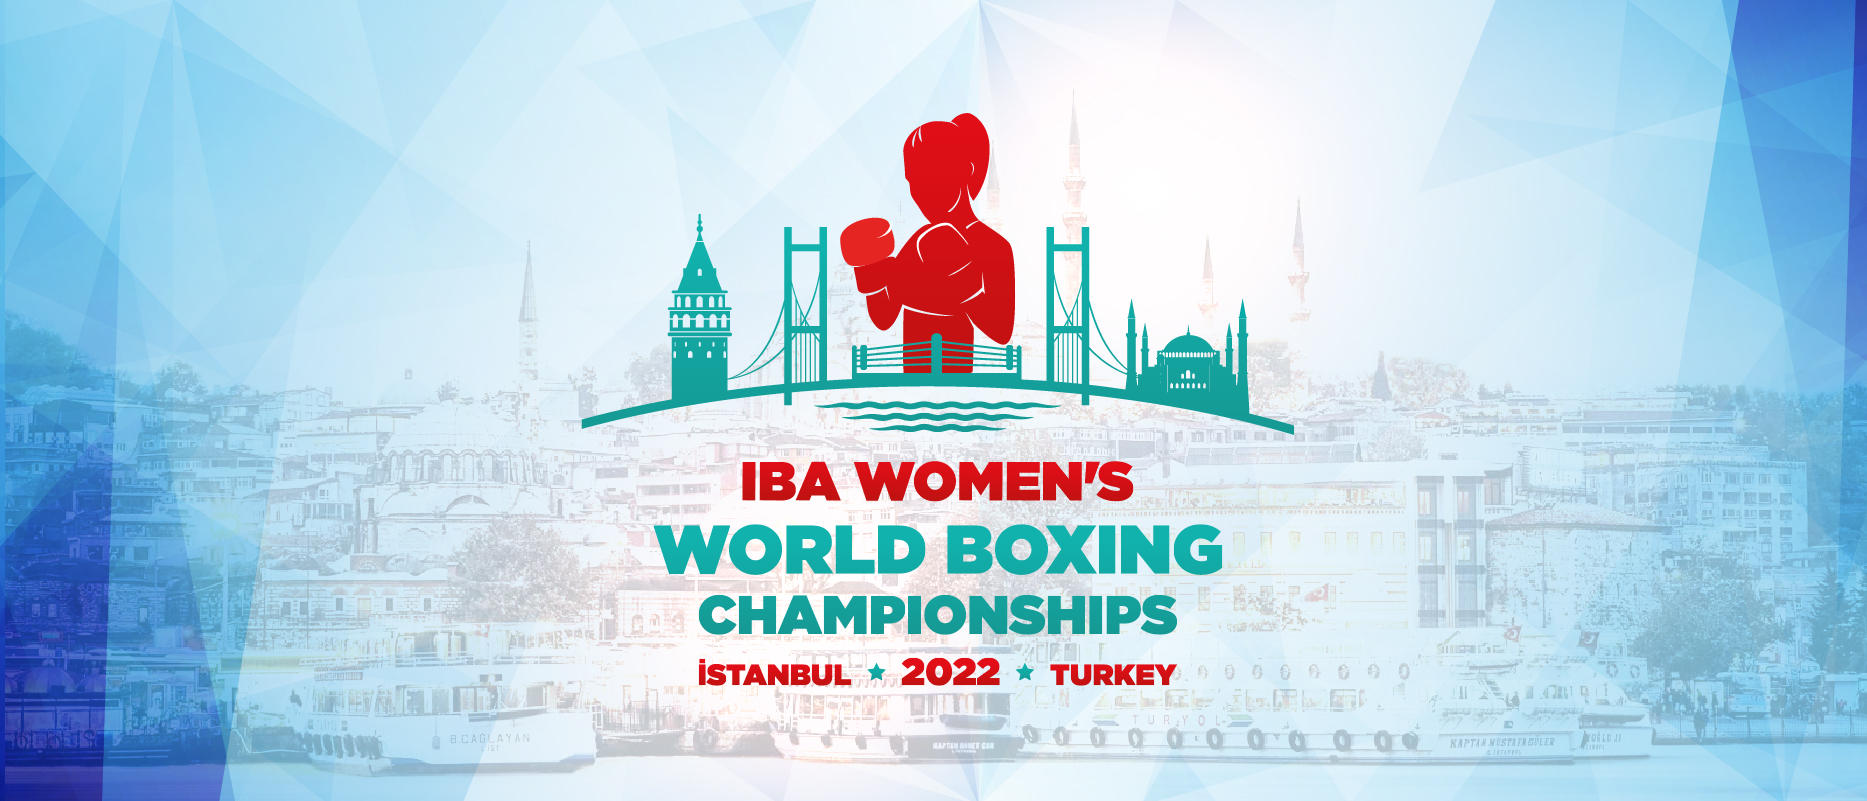 IBA Women's World Boxing Championships Turkey topped medal tally of 2022